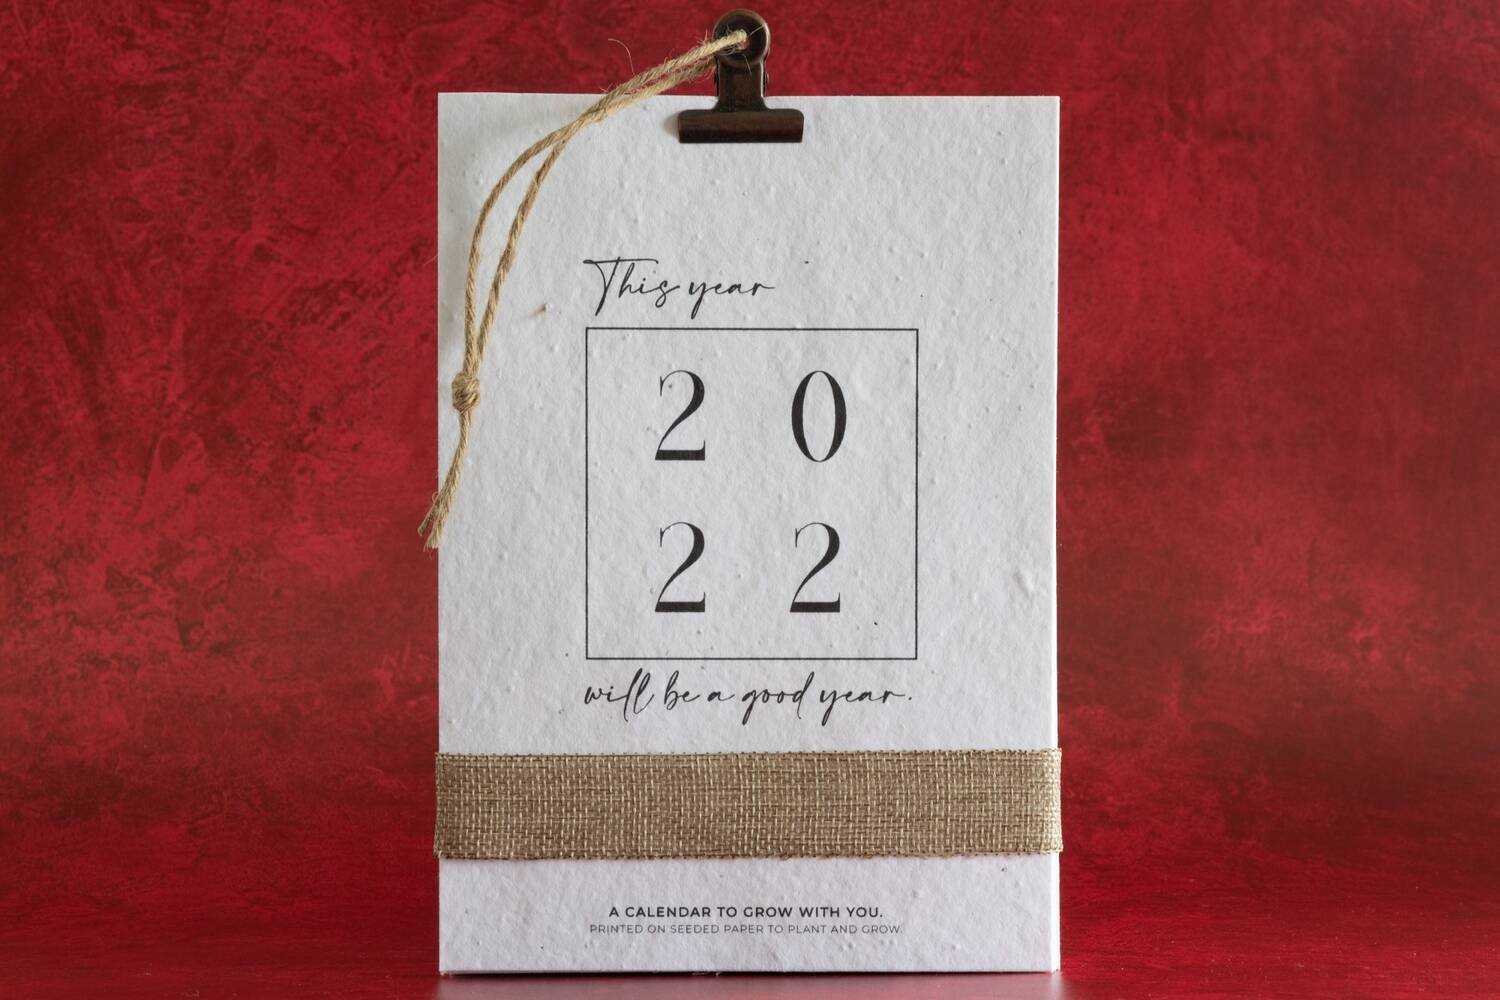 A white, square, paper calendar is held by a bulldog clip at the top and displayed against a red background. It has a hessian tie around the bottom. The front cover says: This year 2022 will be a good year. At the bottom of the page it says: A calendar to grow with you - printed on seeded paper to plant and grow.